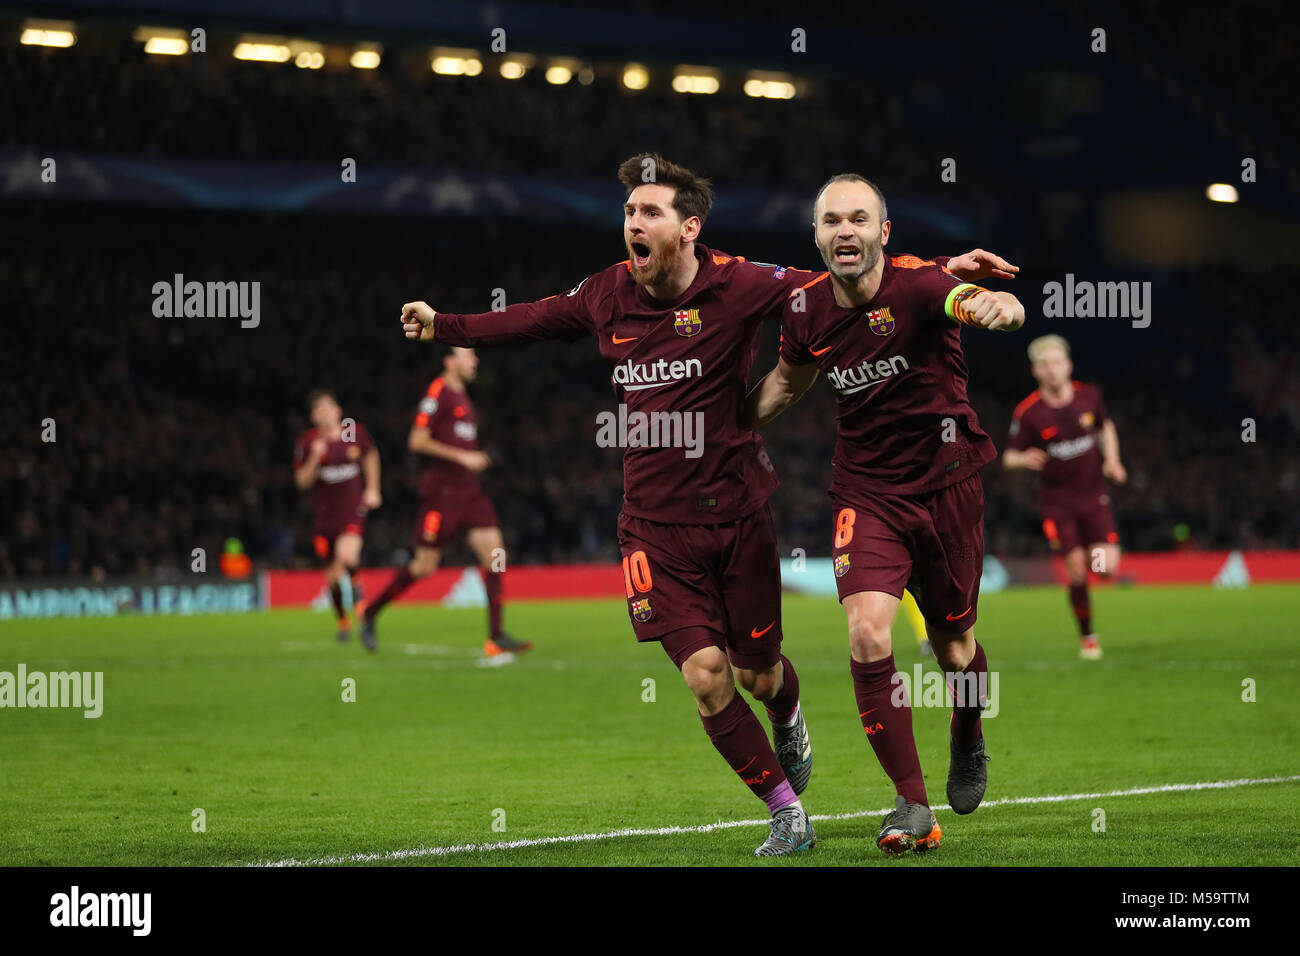 London, UK. 20th February, 2018. Lionel Messi (left) of Barcelona celebrates with Andres Iniesta after scoring the equalising goal, making it 1-1- Chelsea v Barcelona, UEFA Champions League, Round of 16, 1st Leg, Stamford Bridge, London - 20th February 2018. Credit: Richard Calver/Alamy Live News Stock Photo